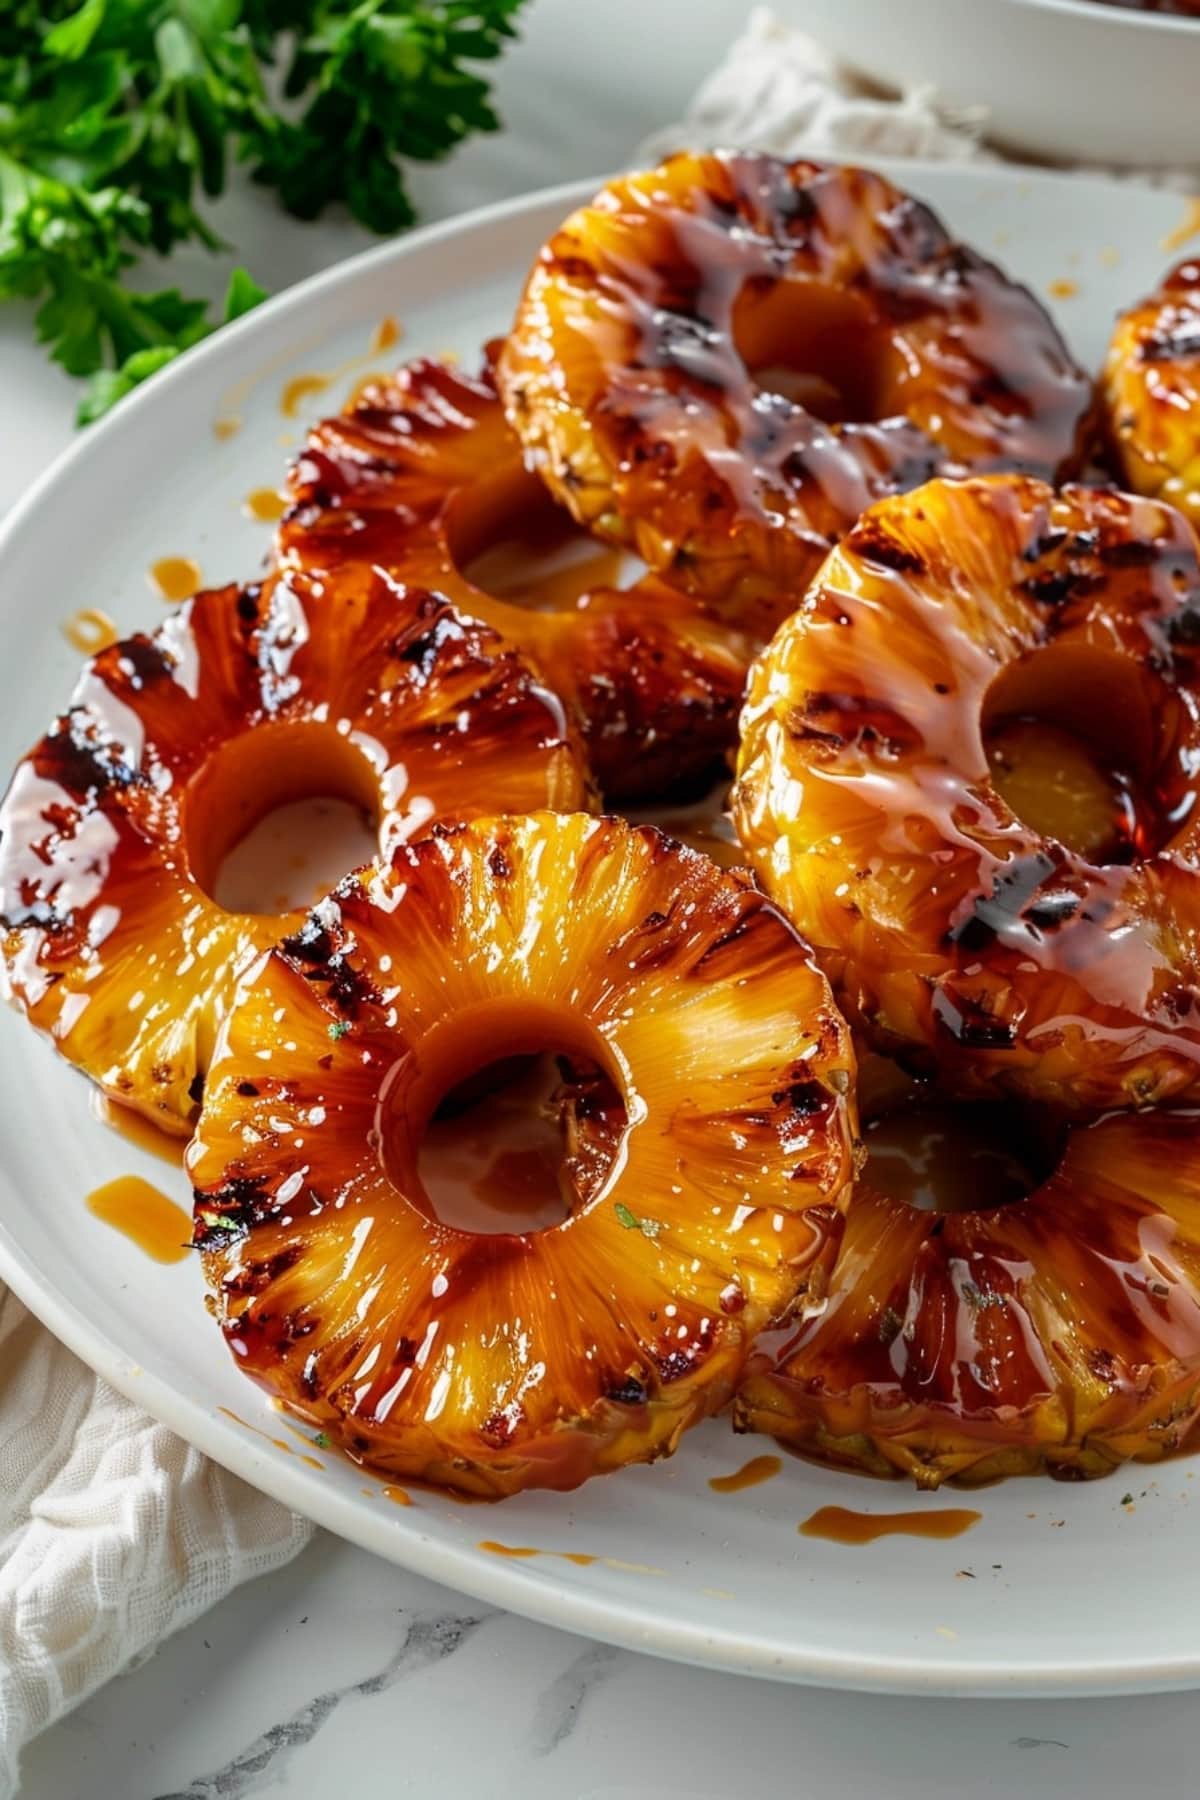 Grilled pineapple rings with sugary glaze served on a white plate.